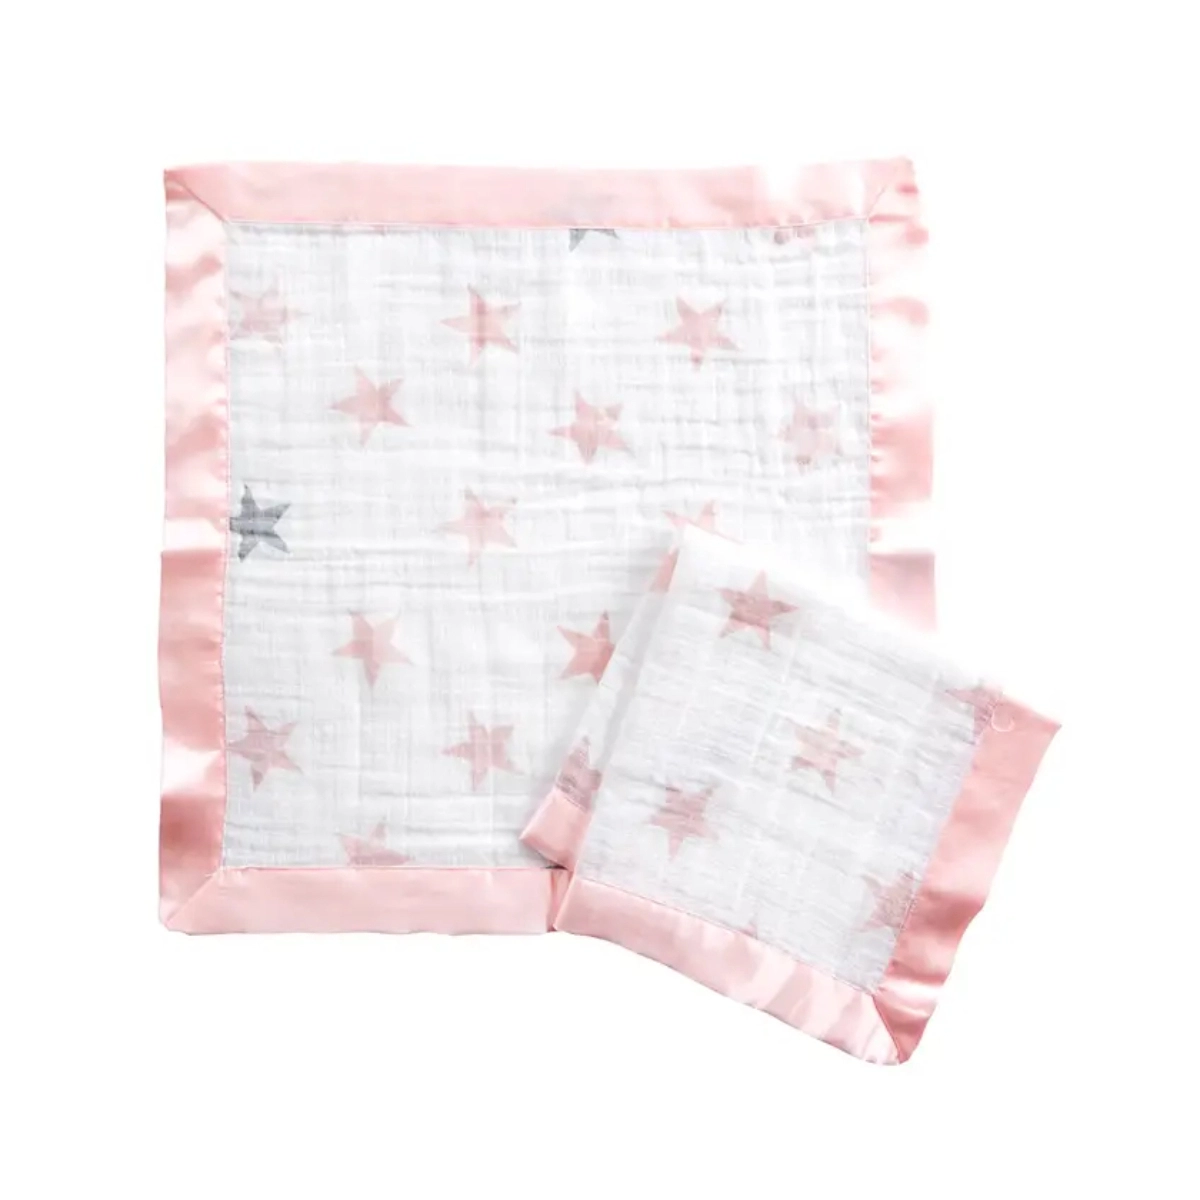 Aden + Anais Pack of 2 Essential Cotton Muslin Security Blankets